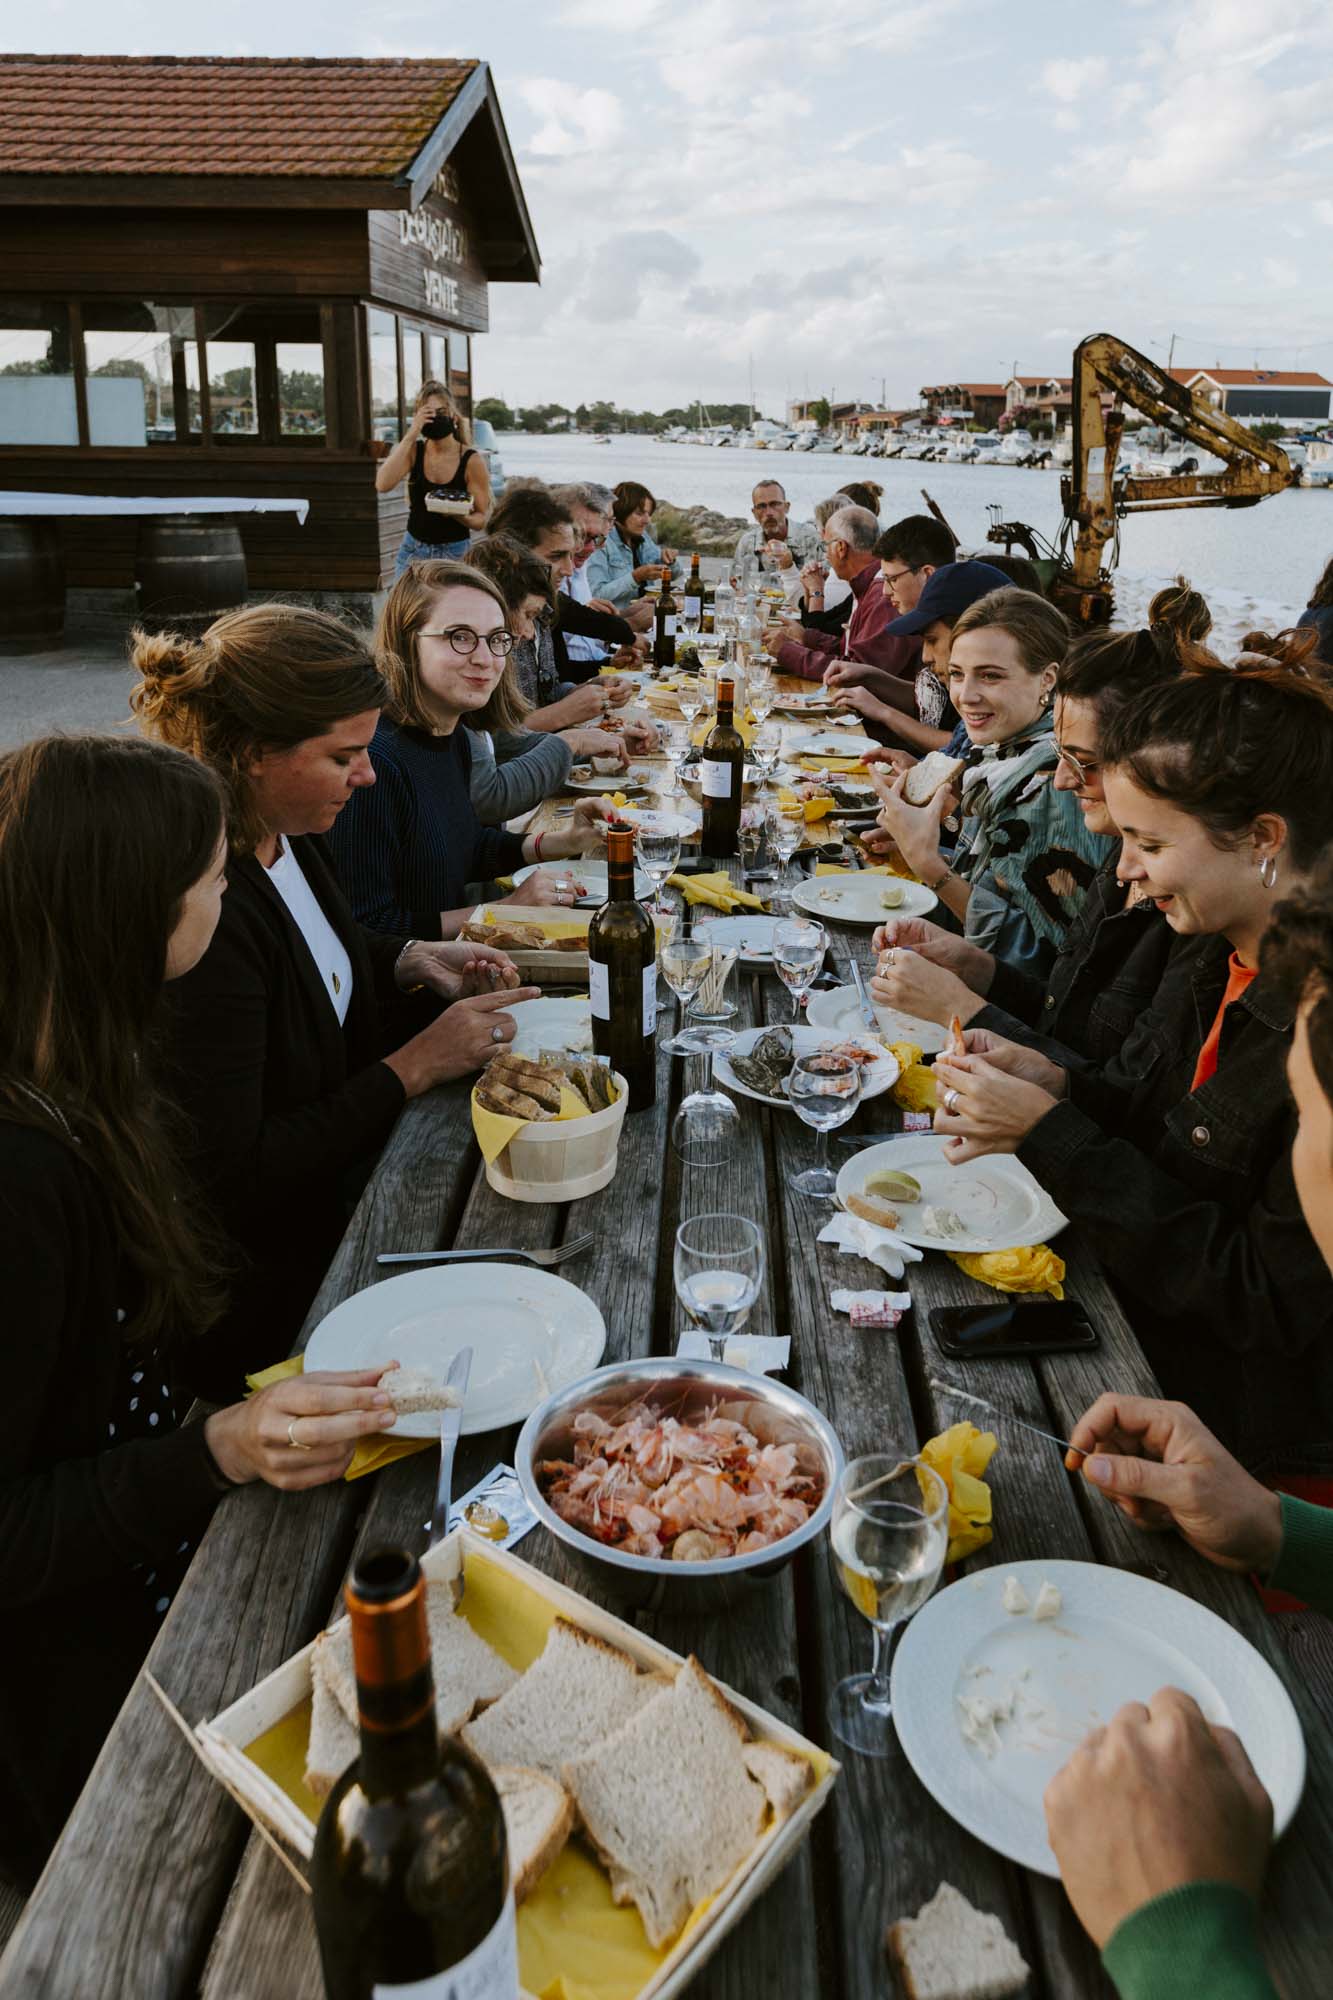 Arcachon wedding photographer: the wedding guests and newlyweds enjoy the last dinner of the celebratory weekend at one of the famous oyster huts, Kabane 171